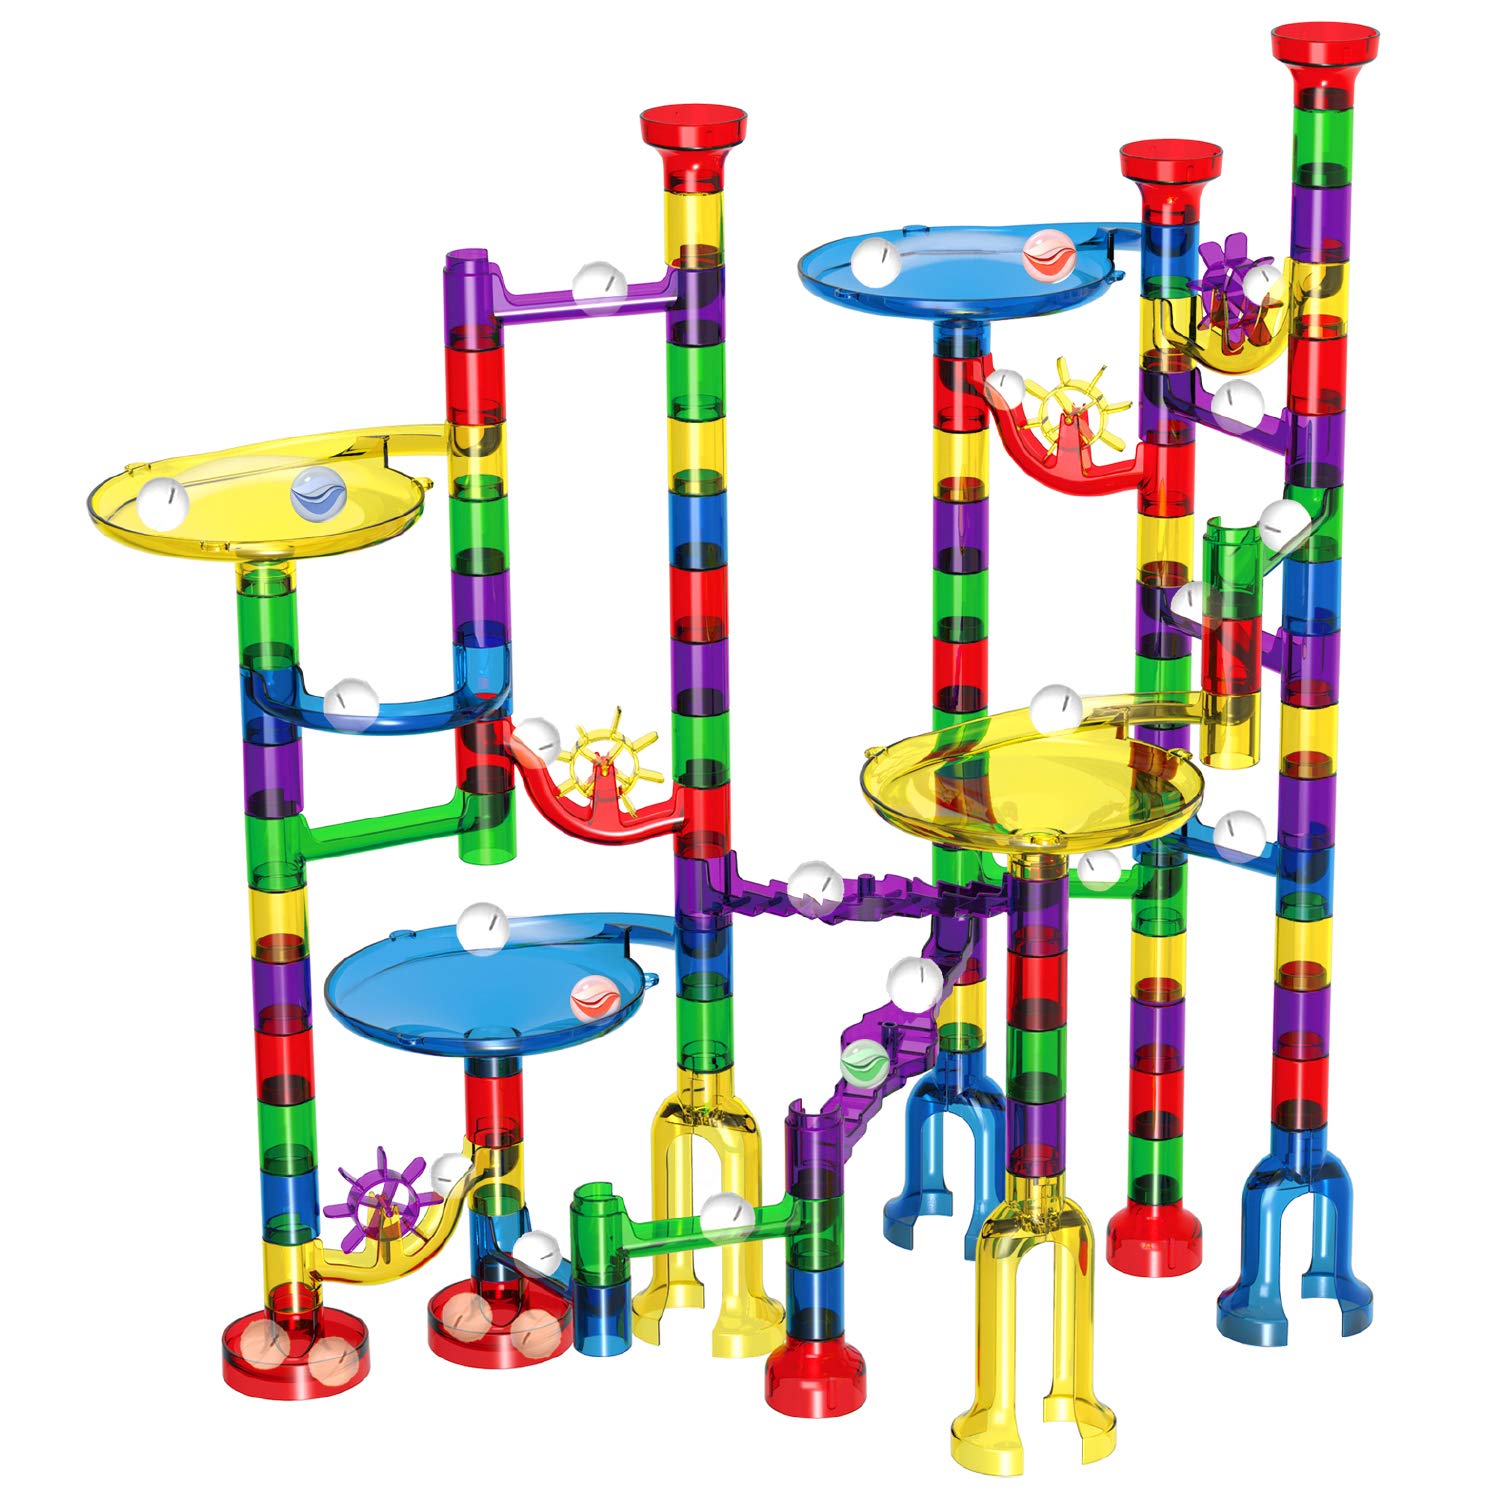 Marble Run Set, Glonova 127 Pcs Marble Race Track for Kids with Glass Marbles Upgrade Marble Works Set